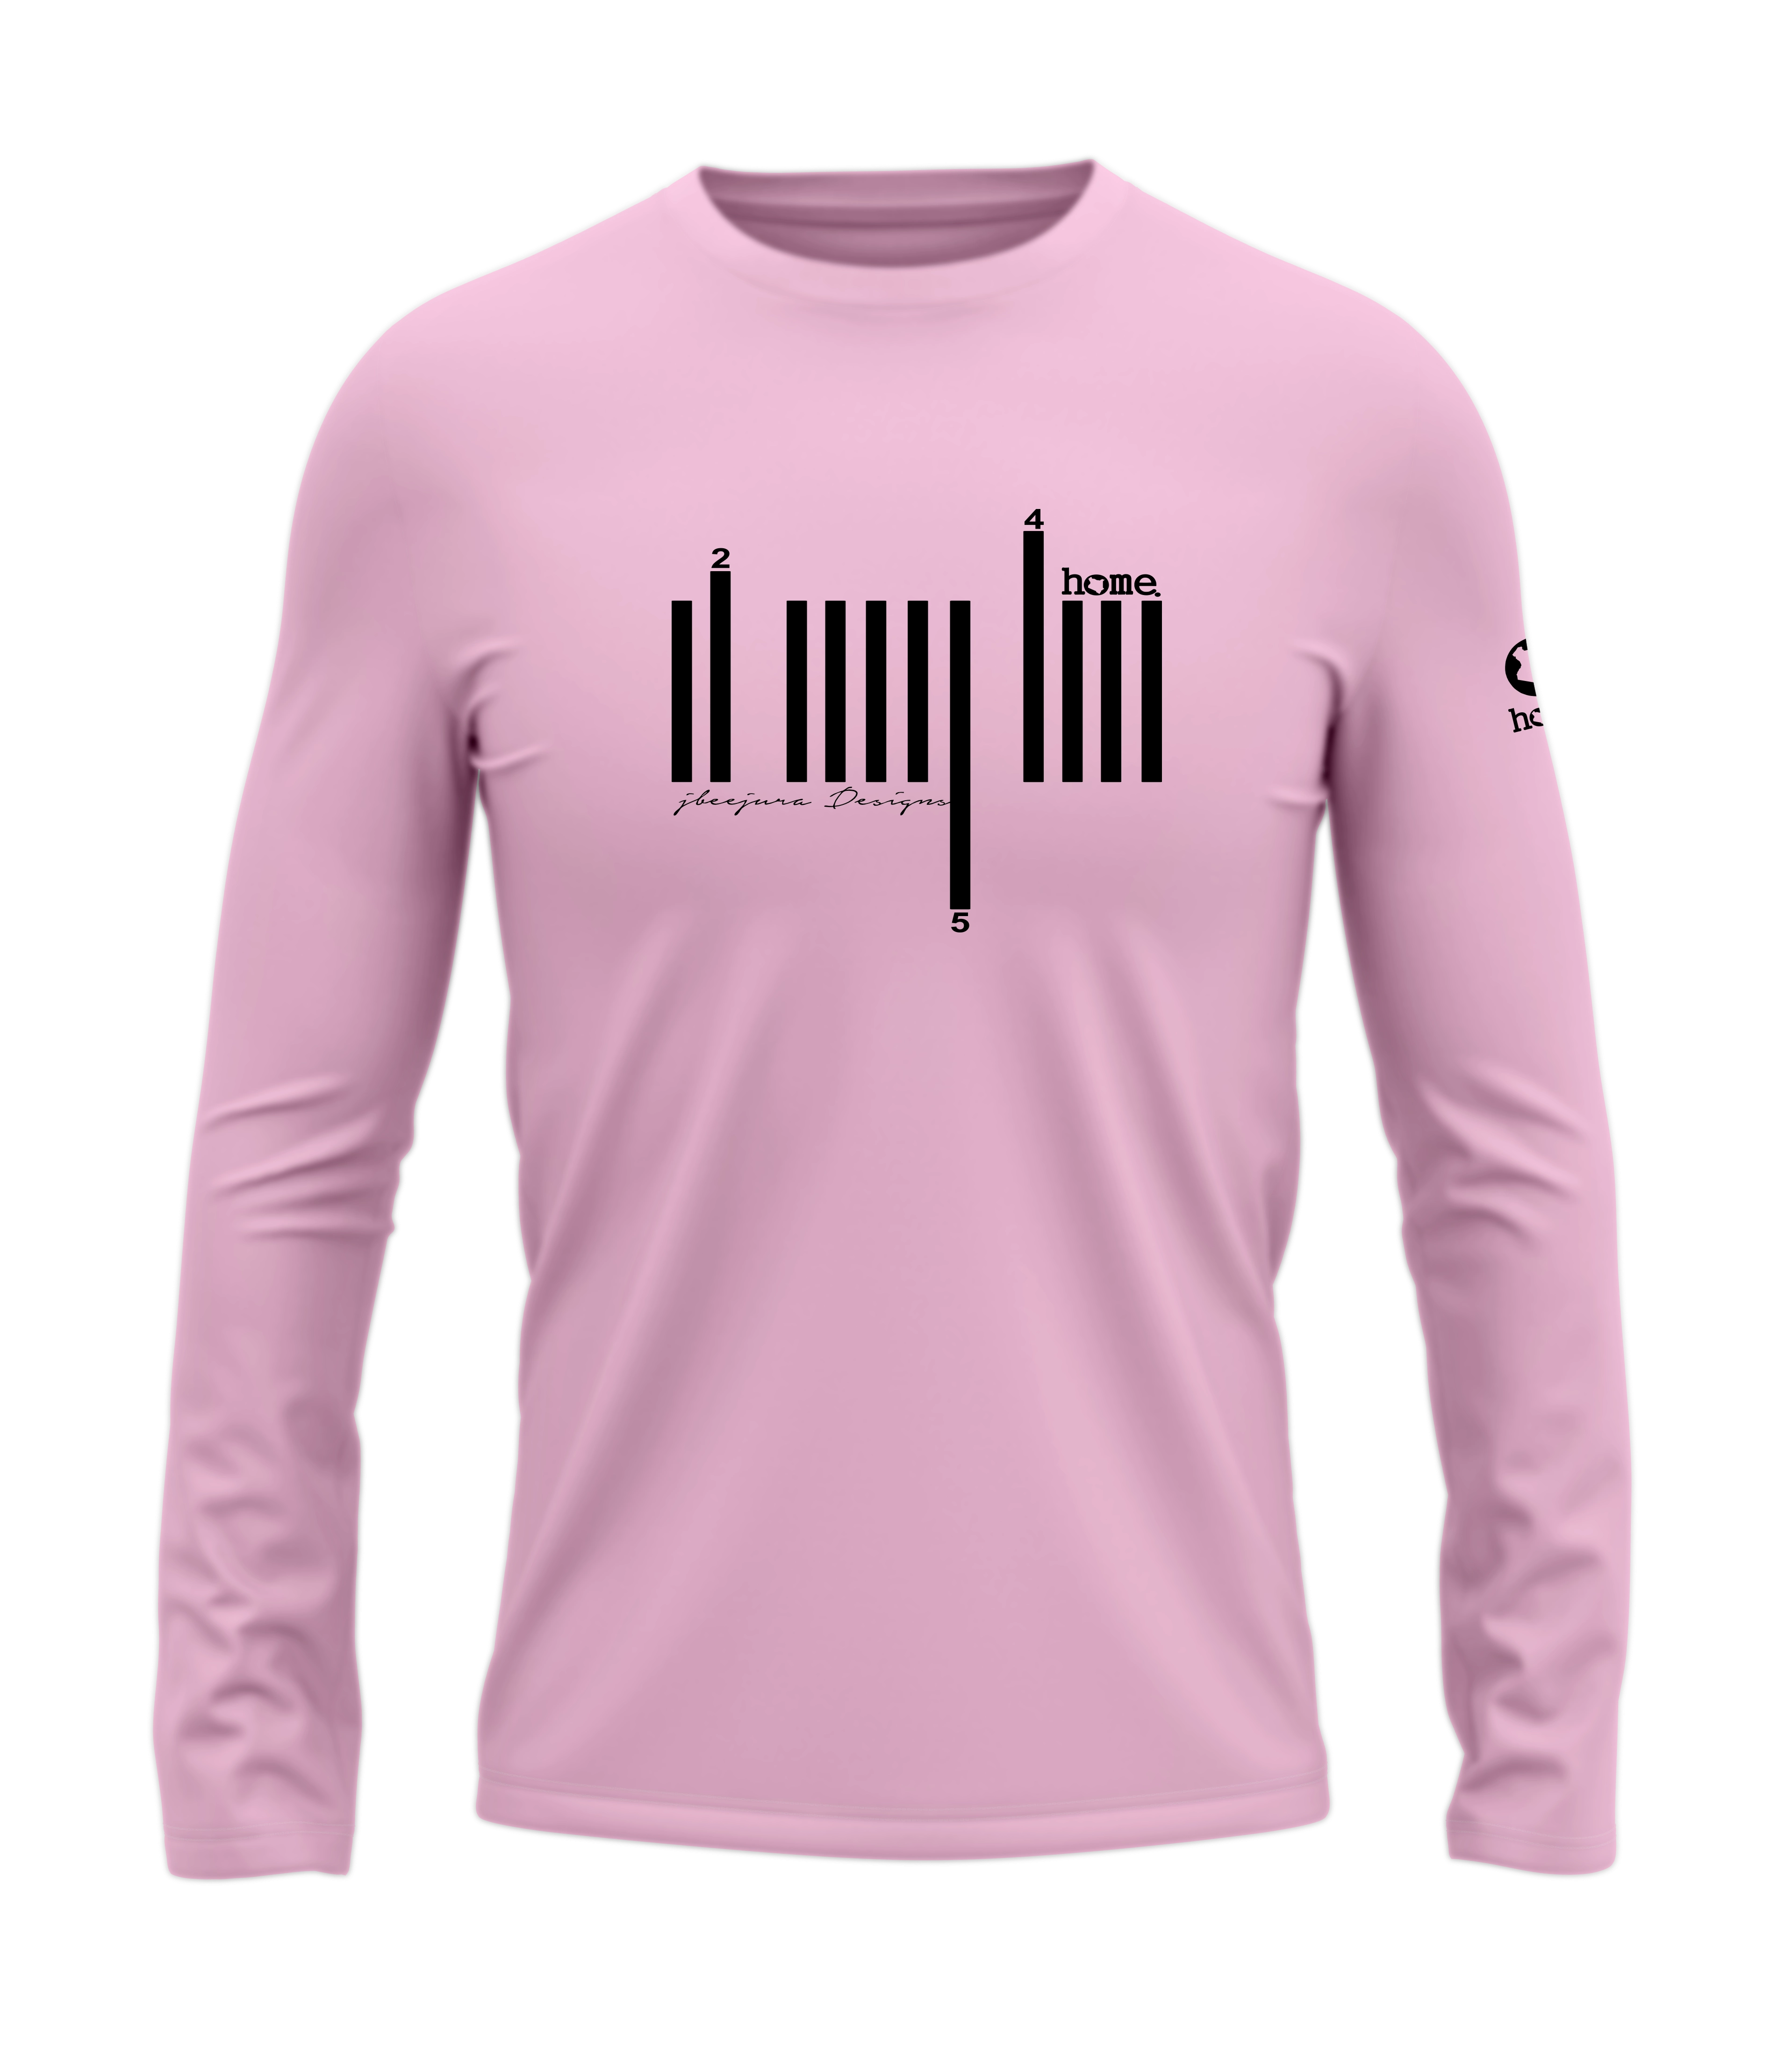 home_254 LONG-SLEEVED PINK T-SHIRT WITH A BLACK BARS PRINT – COTTON PLUS FABRIC